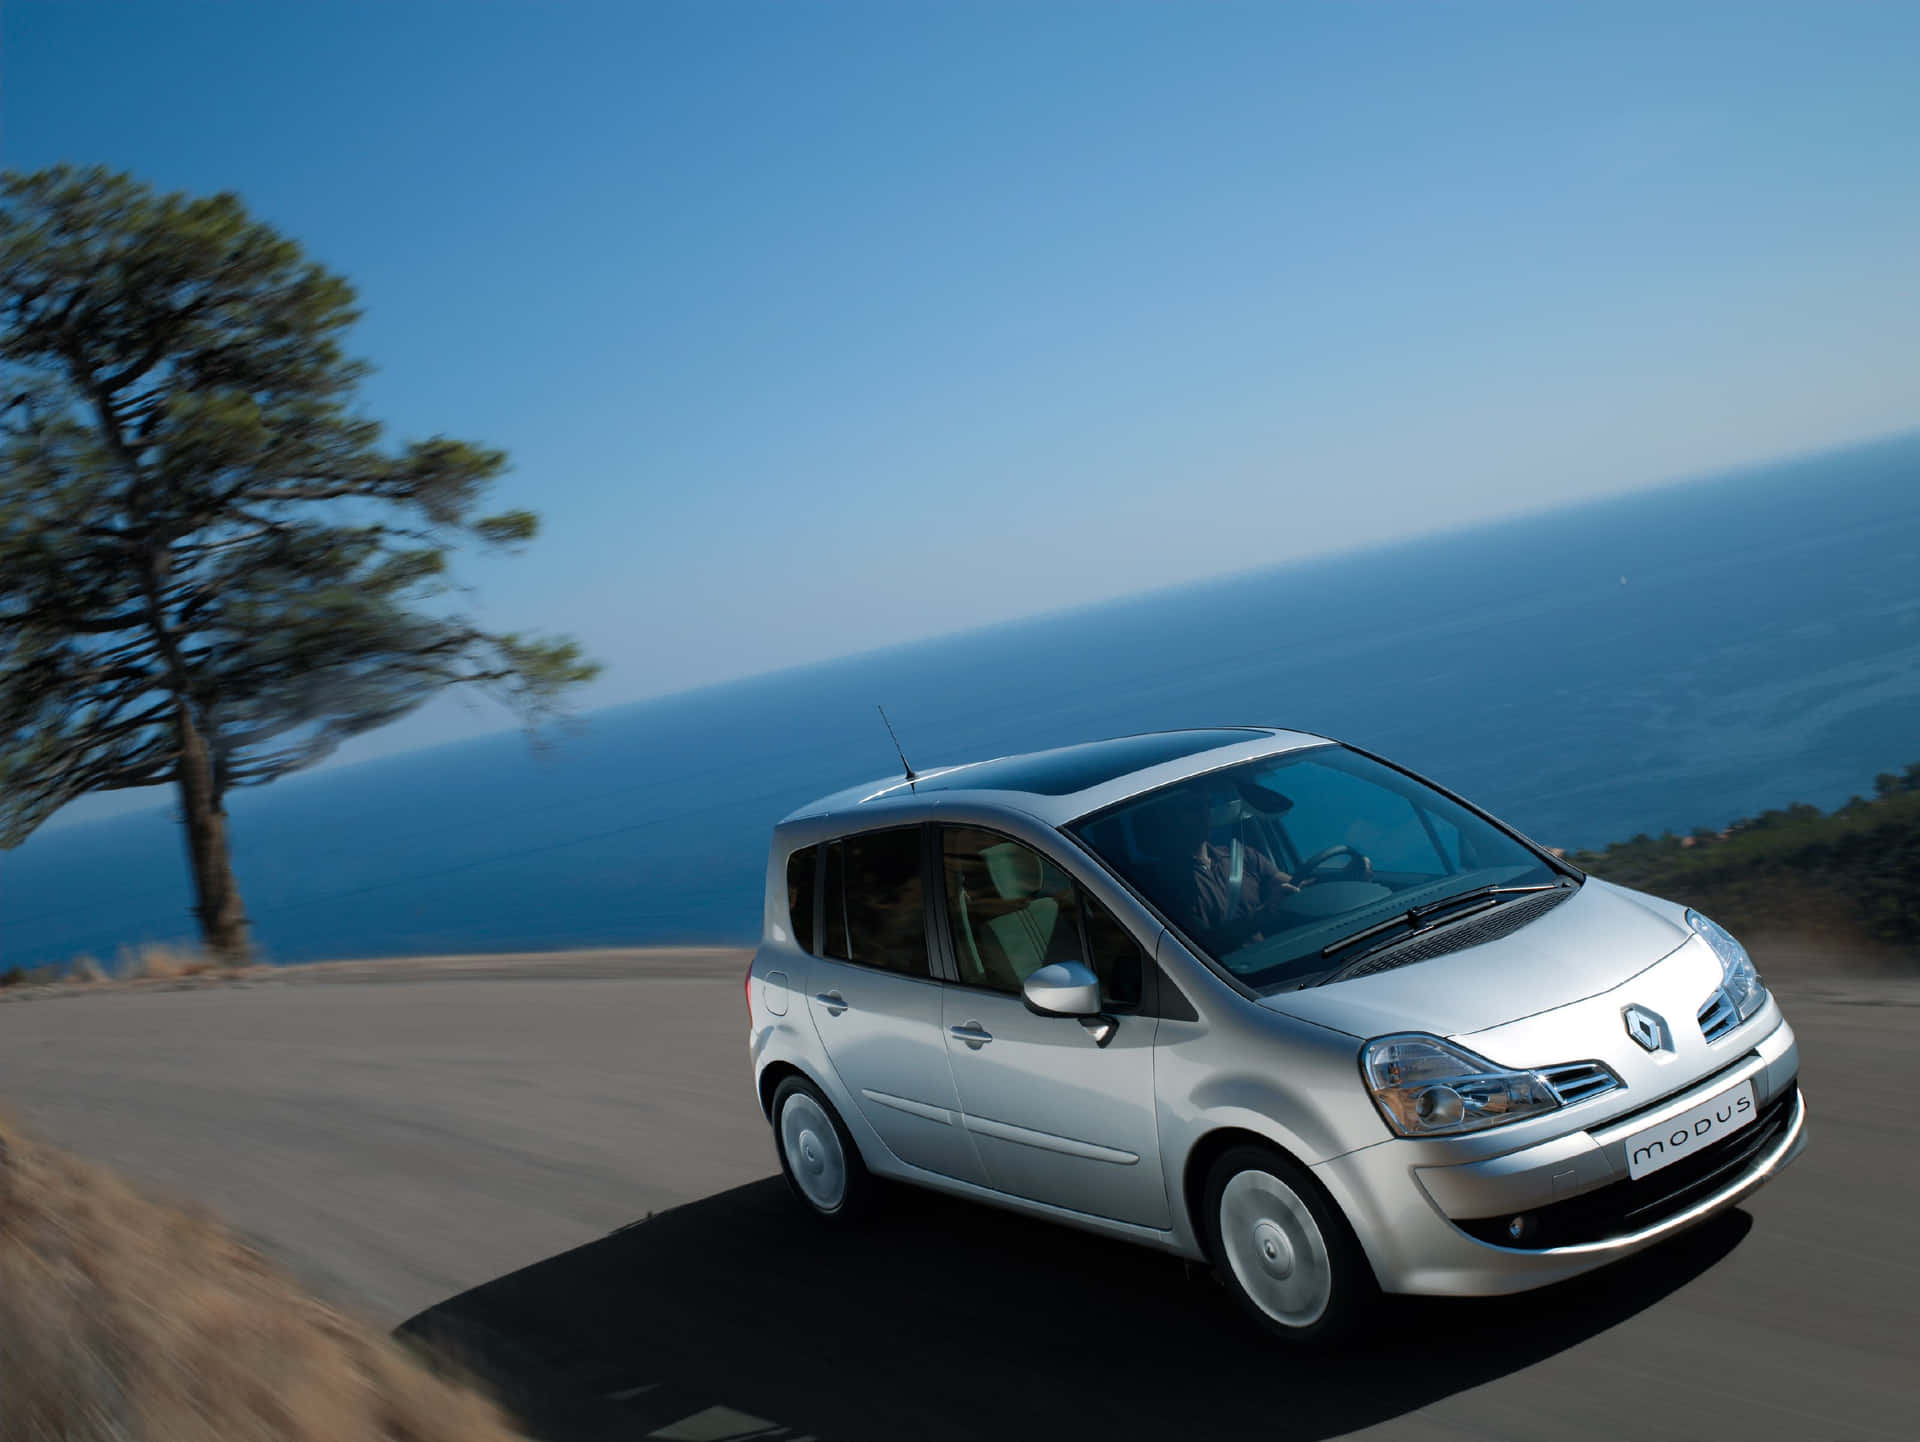 Stylish Renault Modus on the Road Wallpaper